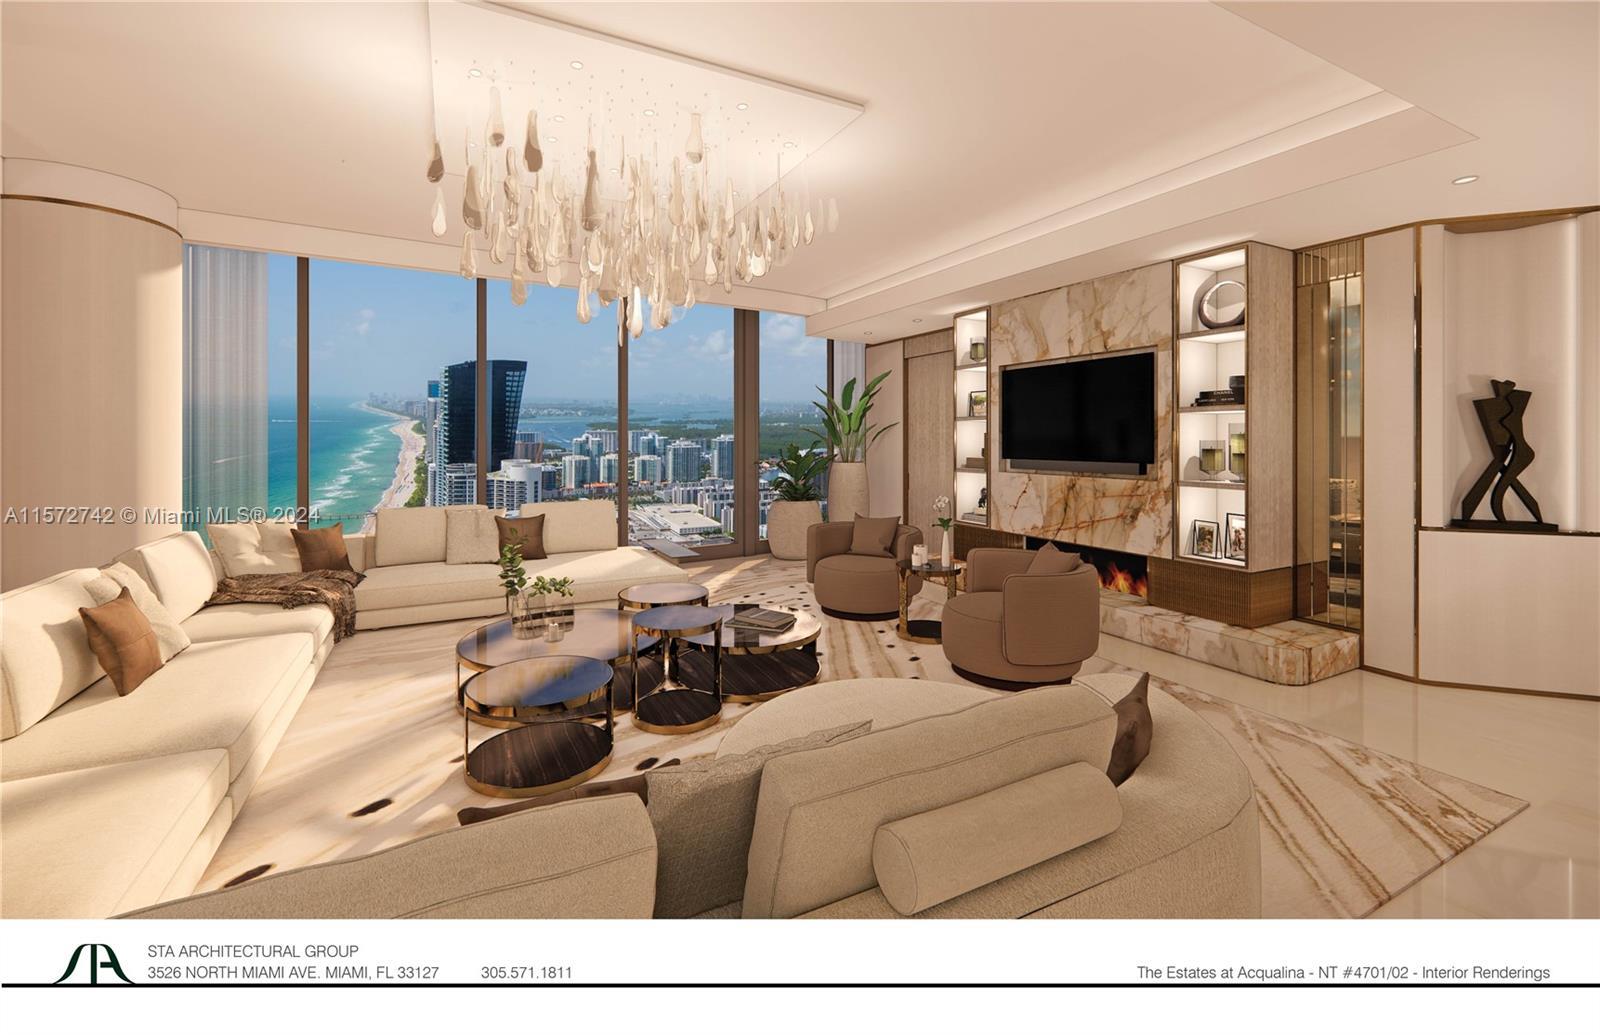 Spectacular Mansions in the sky. Full floor 5 bedrooms 7 bath residence delivered with a 1.7M Luxury